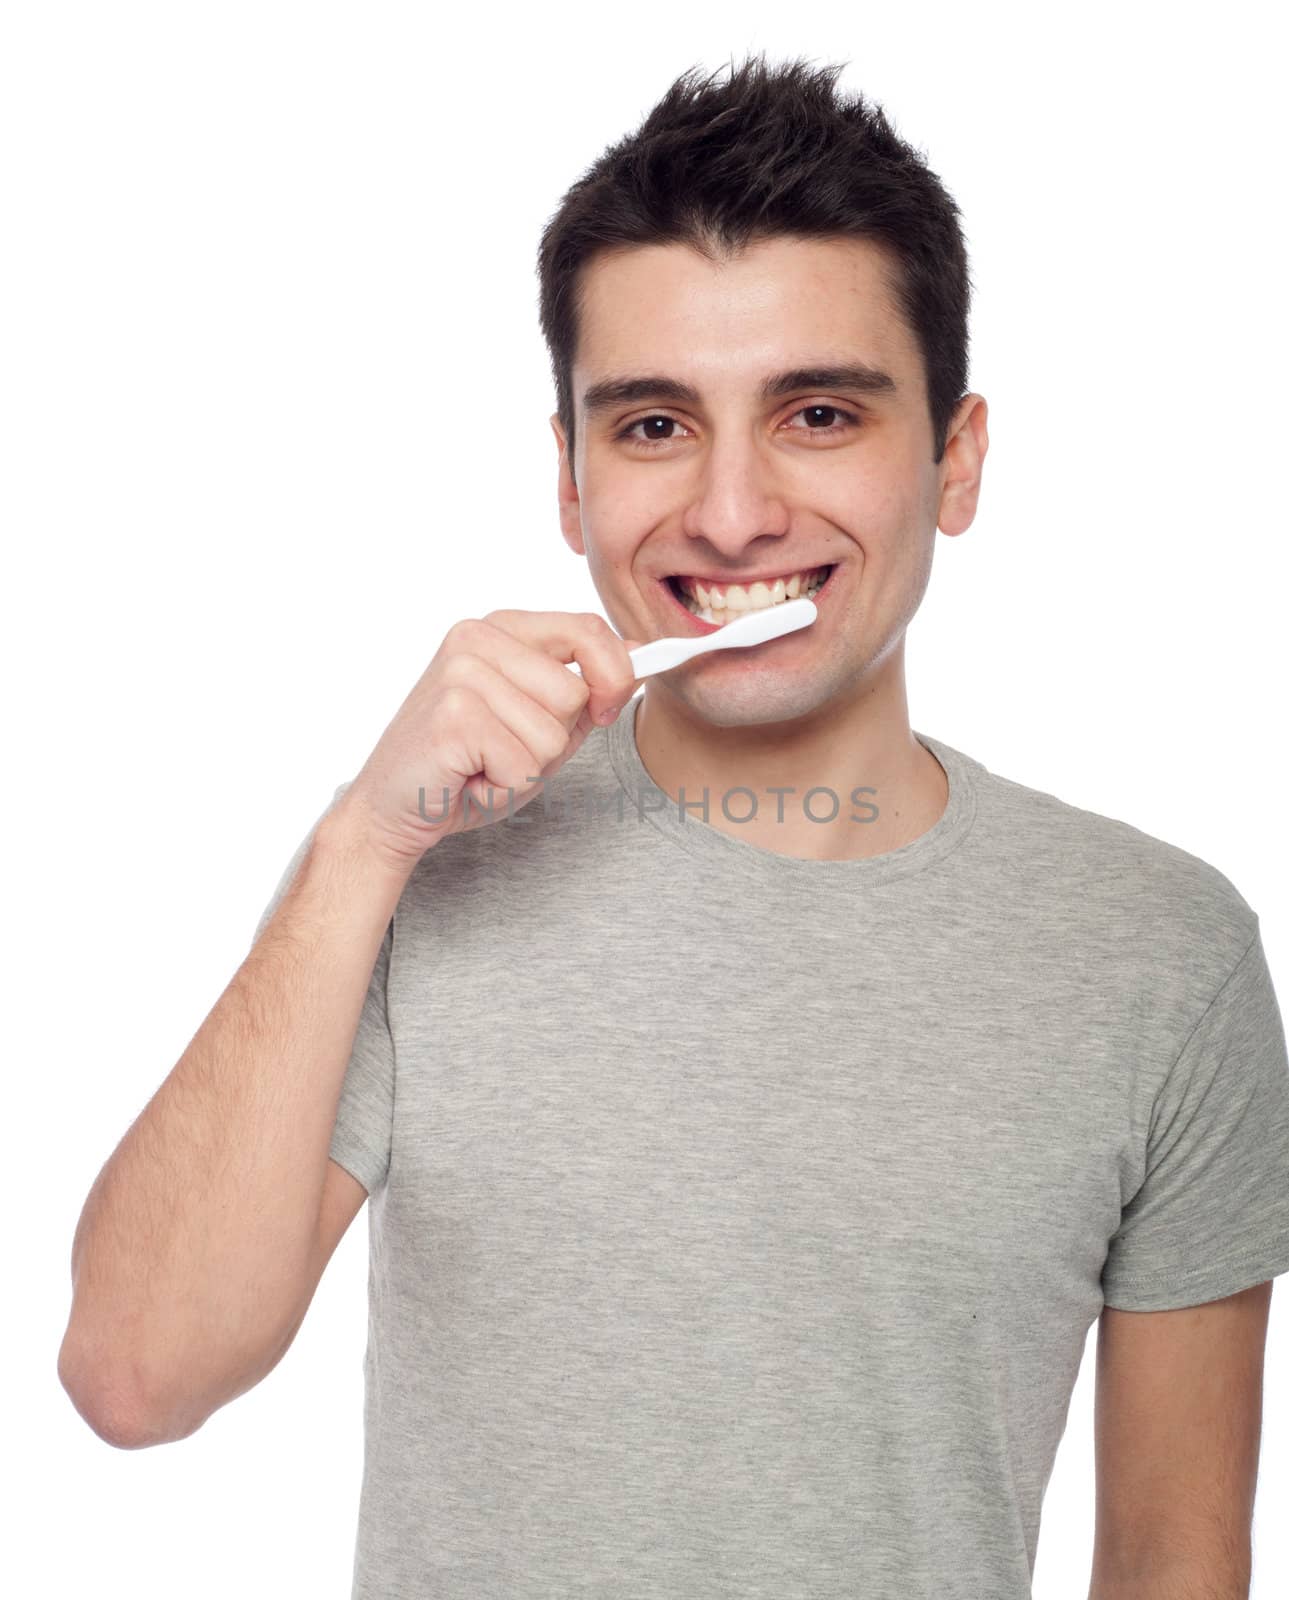 handsome young man brushing his teeth with toothbrush (isolated on white background)